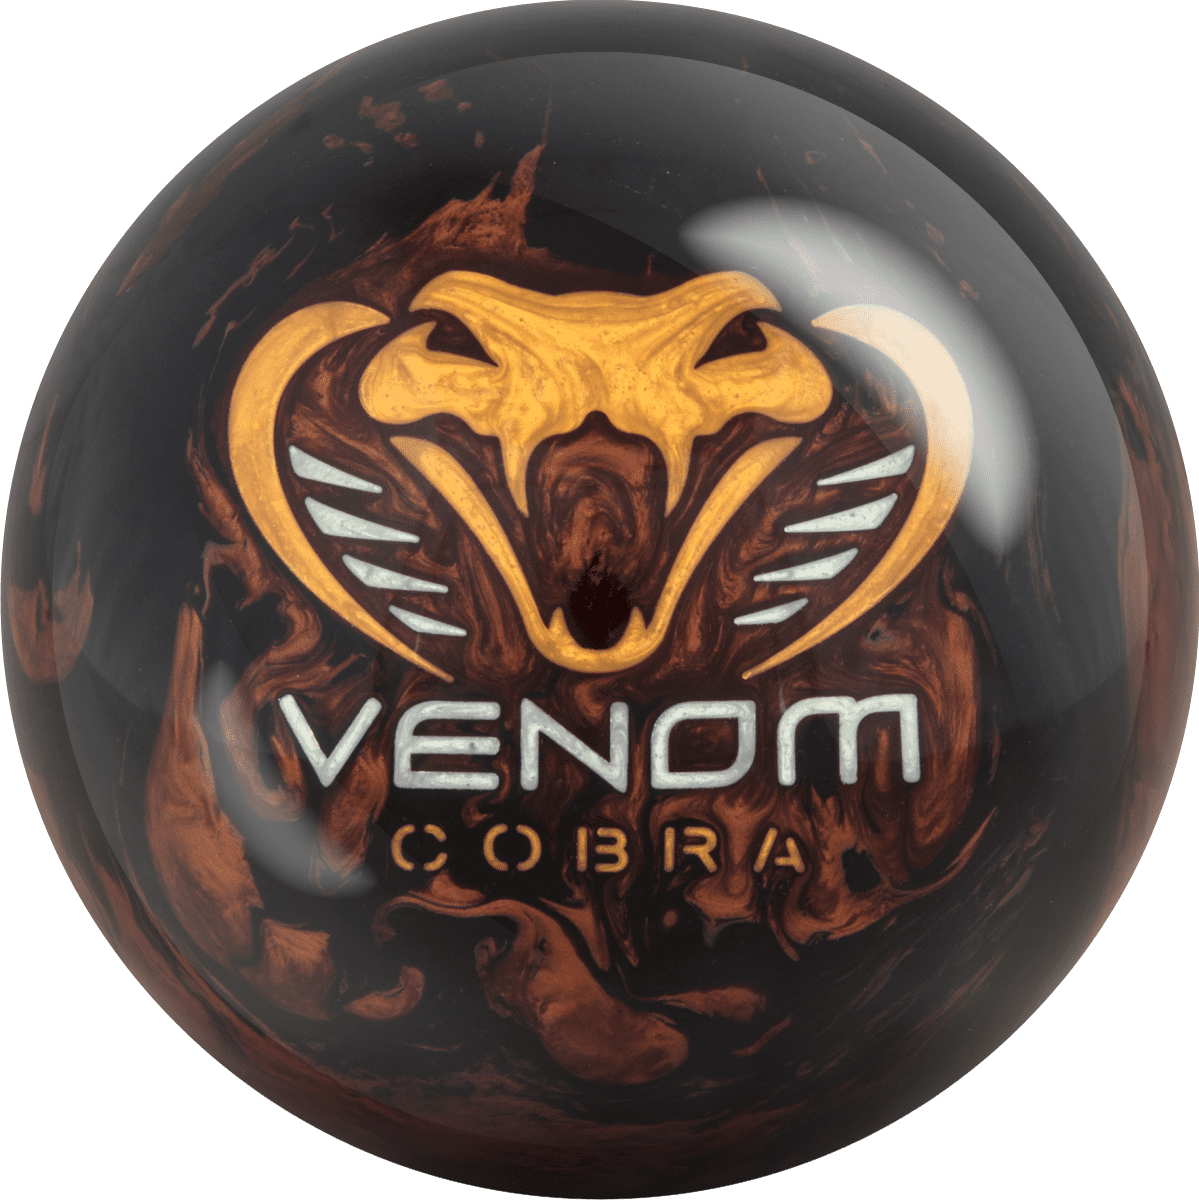 the venom cobra bowling ball still available in 15 or 16 lbs?